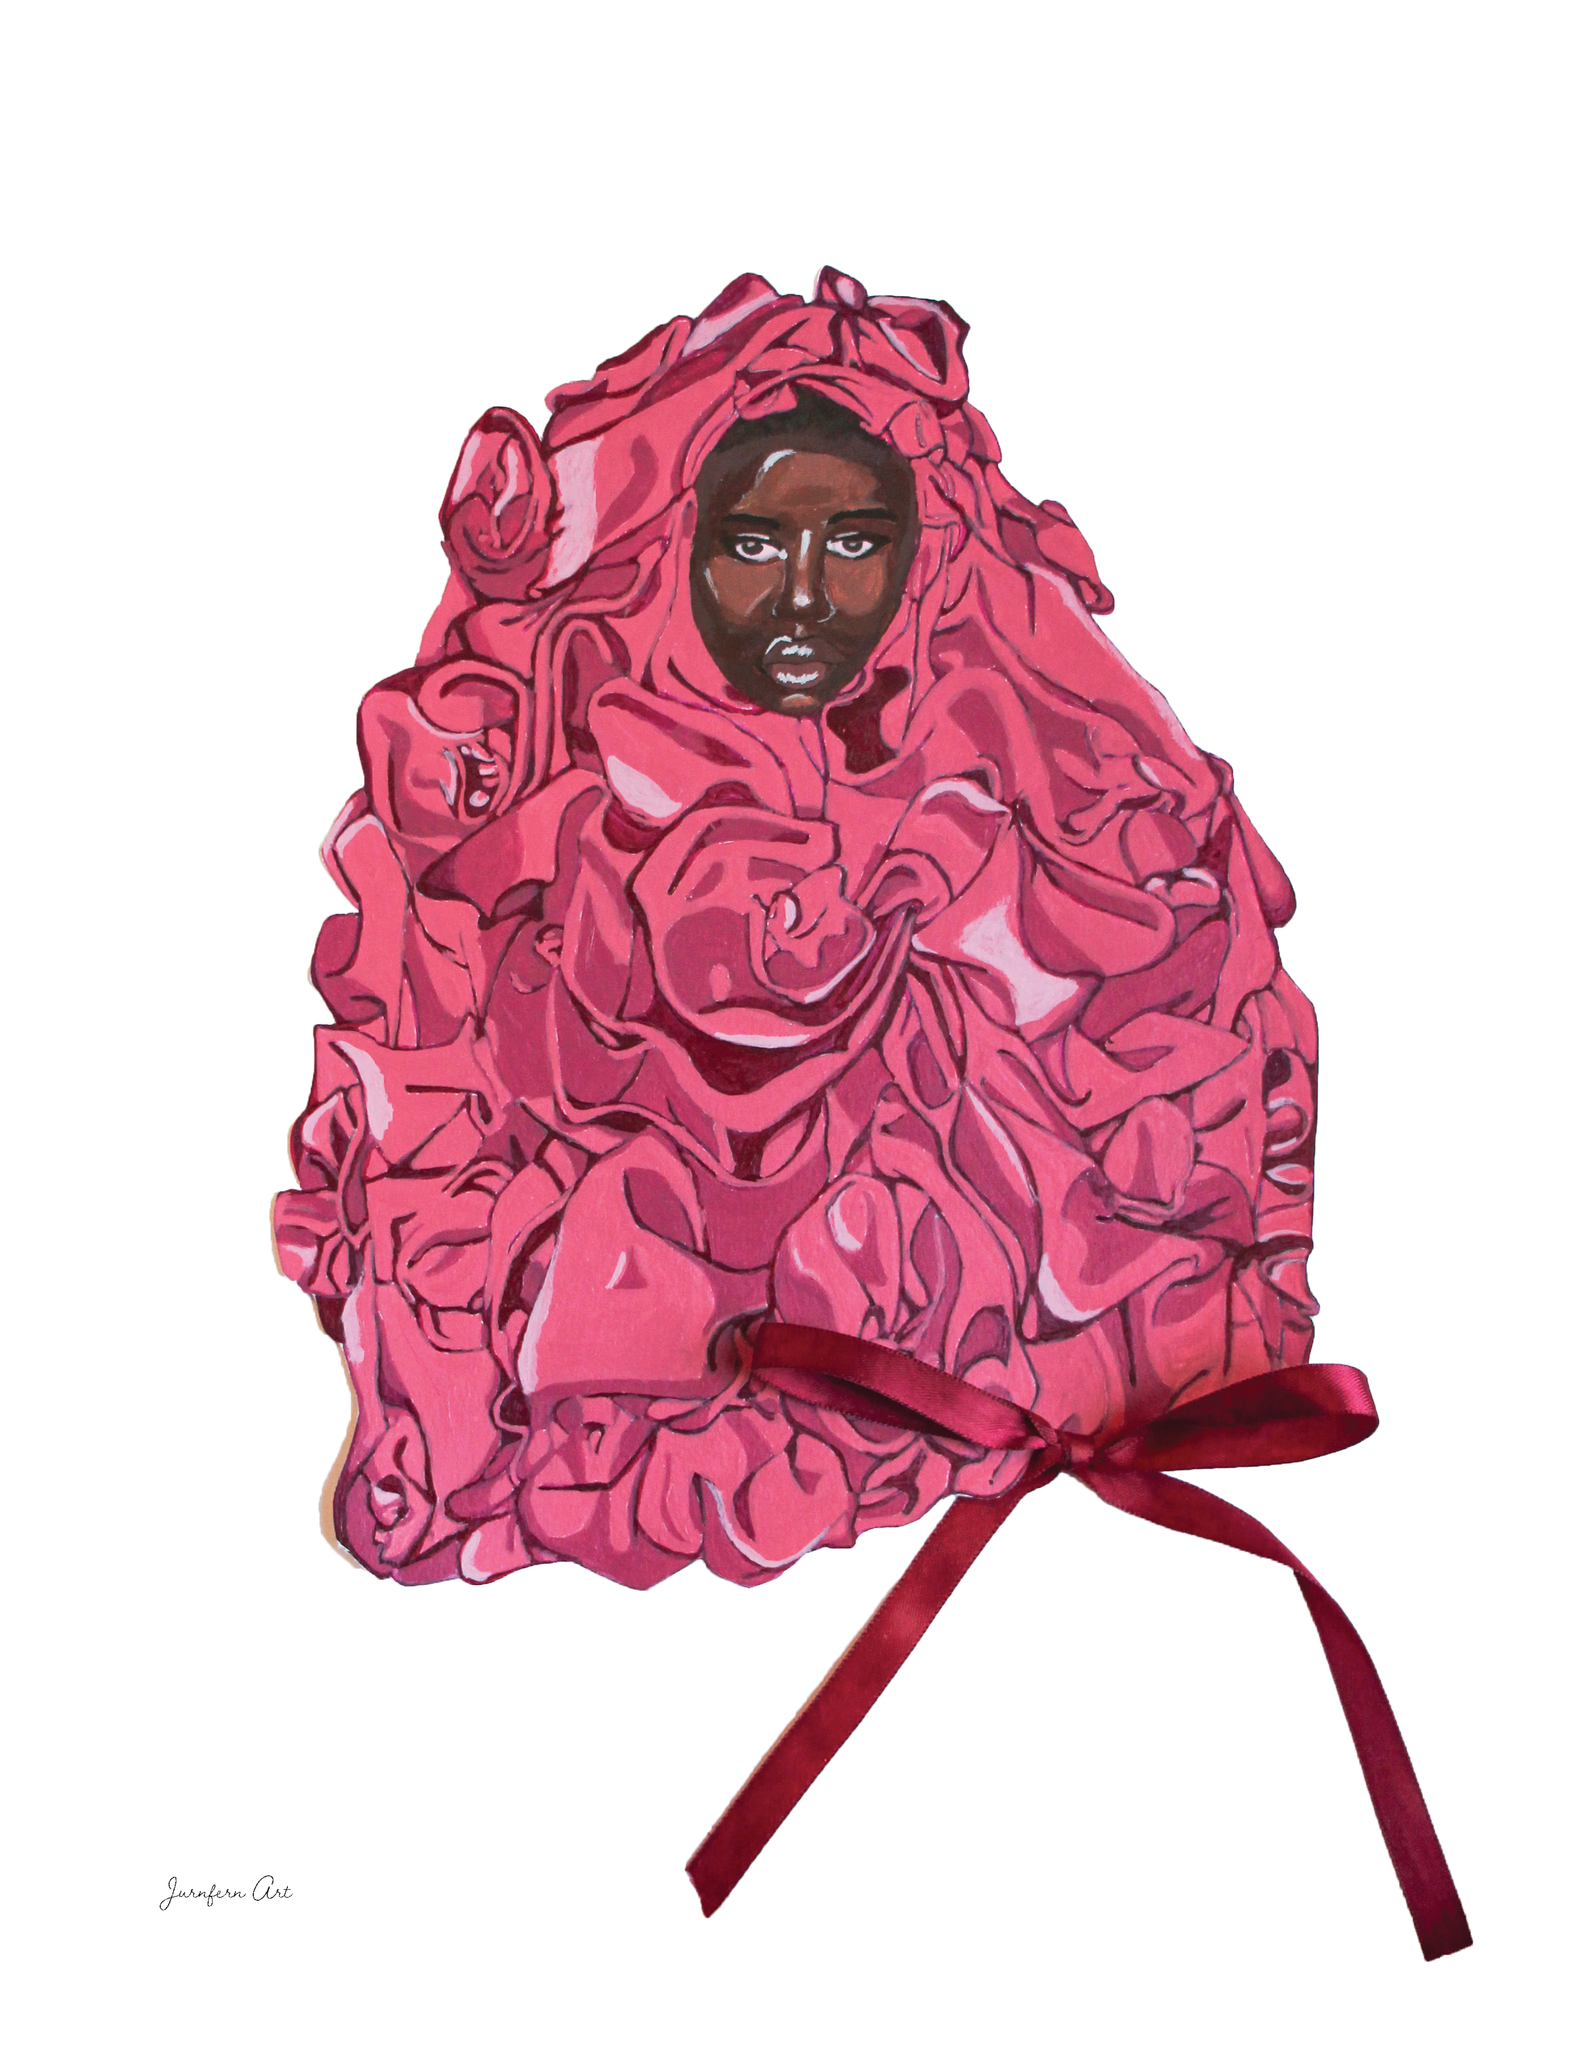 An art print with an illustration of Black supermodel Adut Akech wearing a pink Valentino gown with a bow on it, with a white background